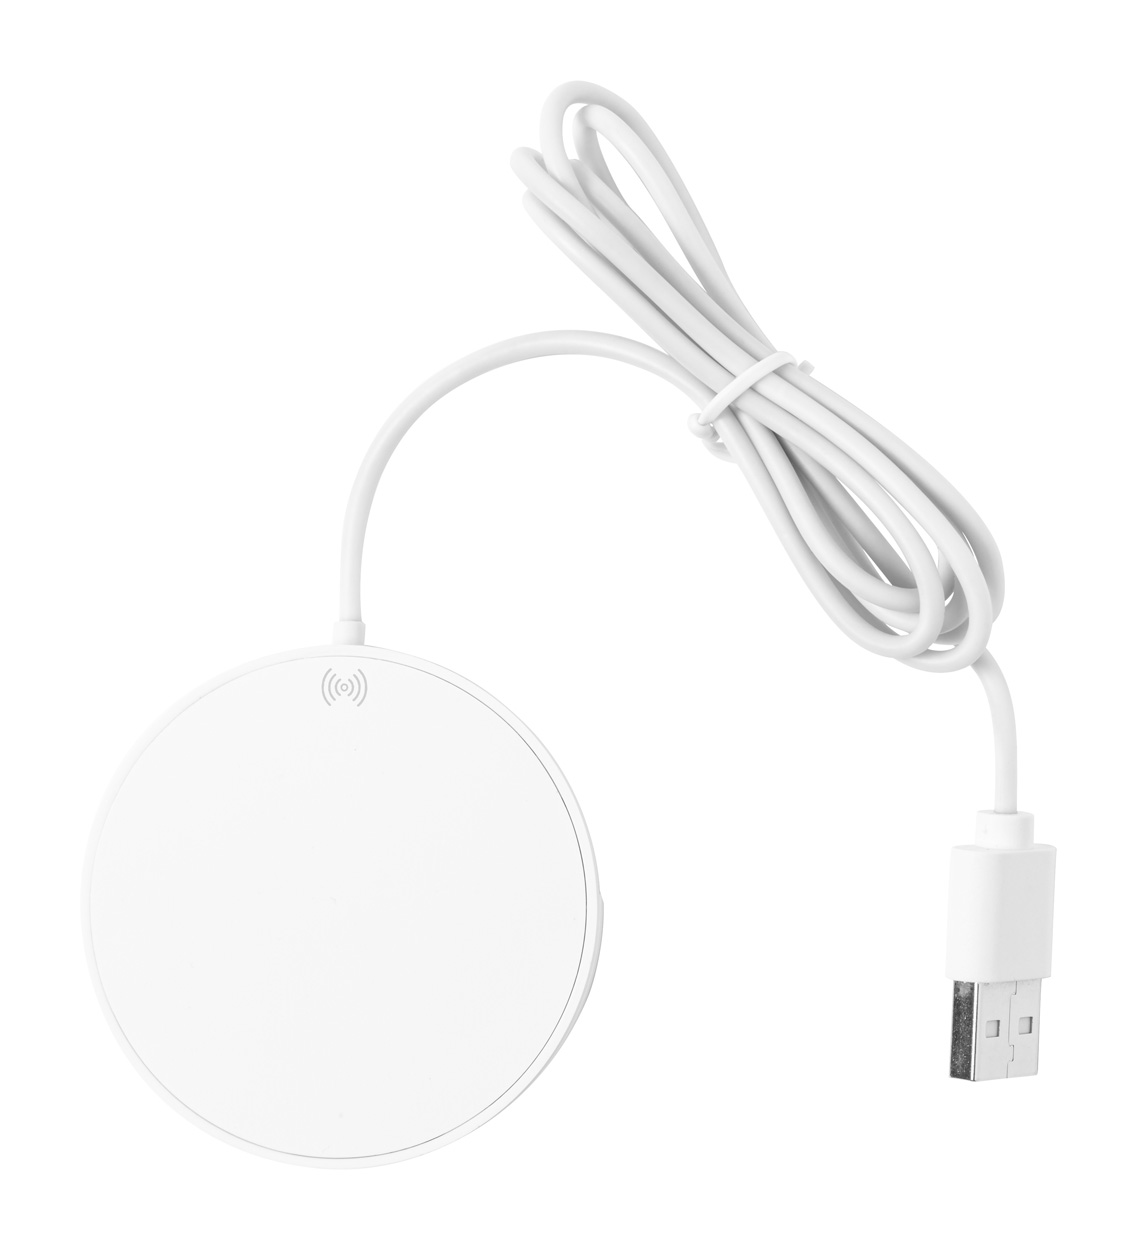 Dixlem RABS magnetic wireless charger